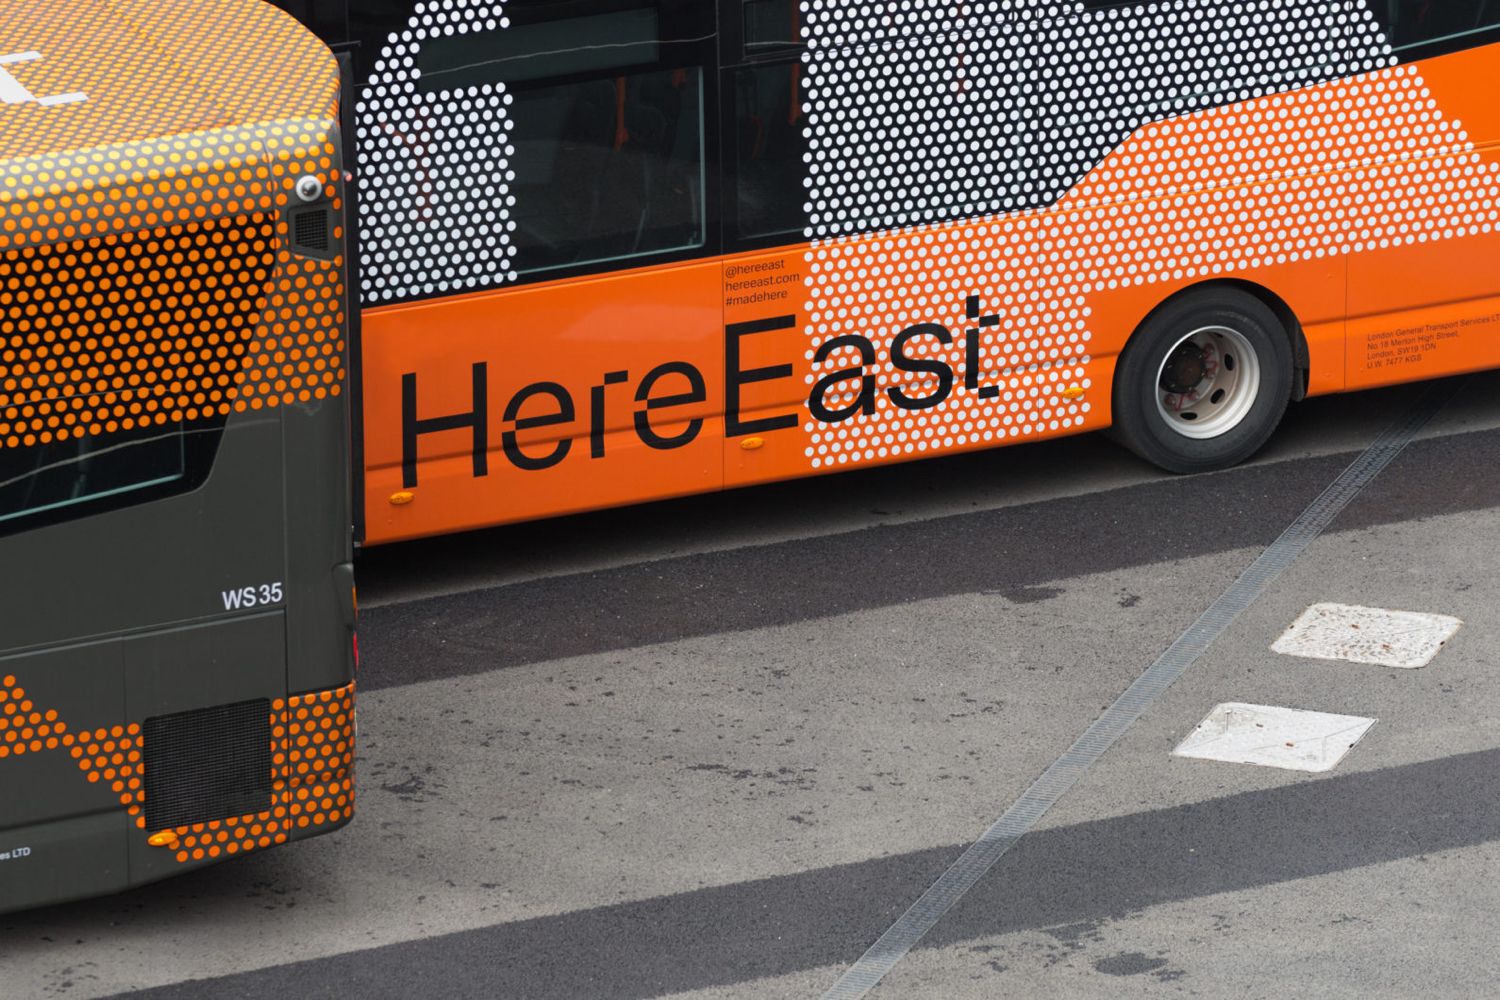 Bus livery designed by dn&co. for commercial space Here East